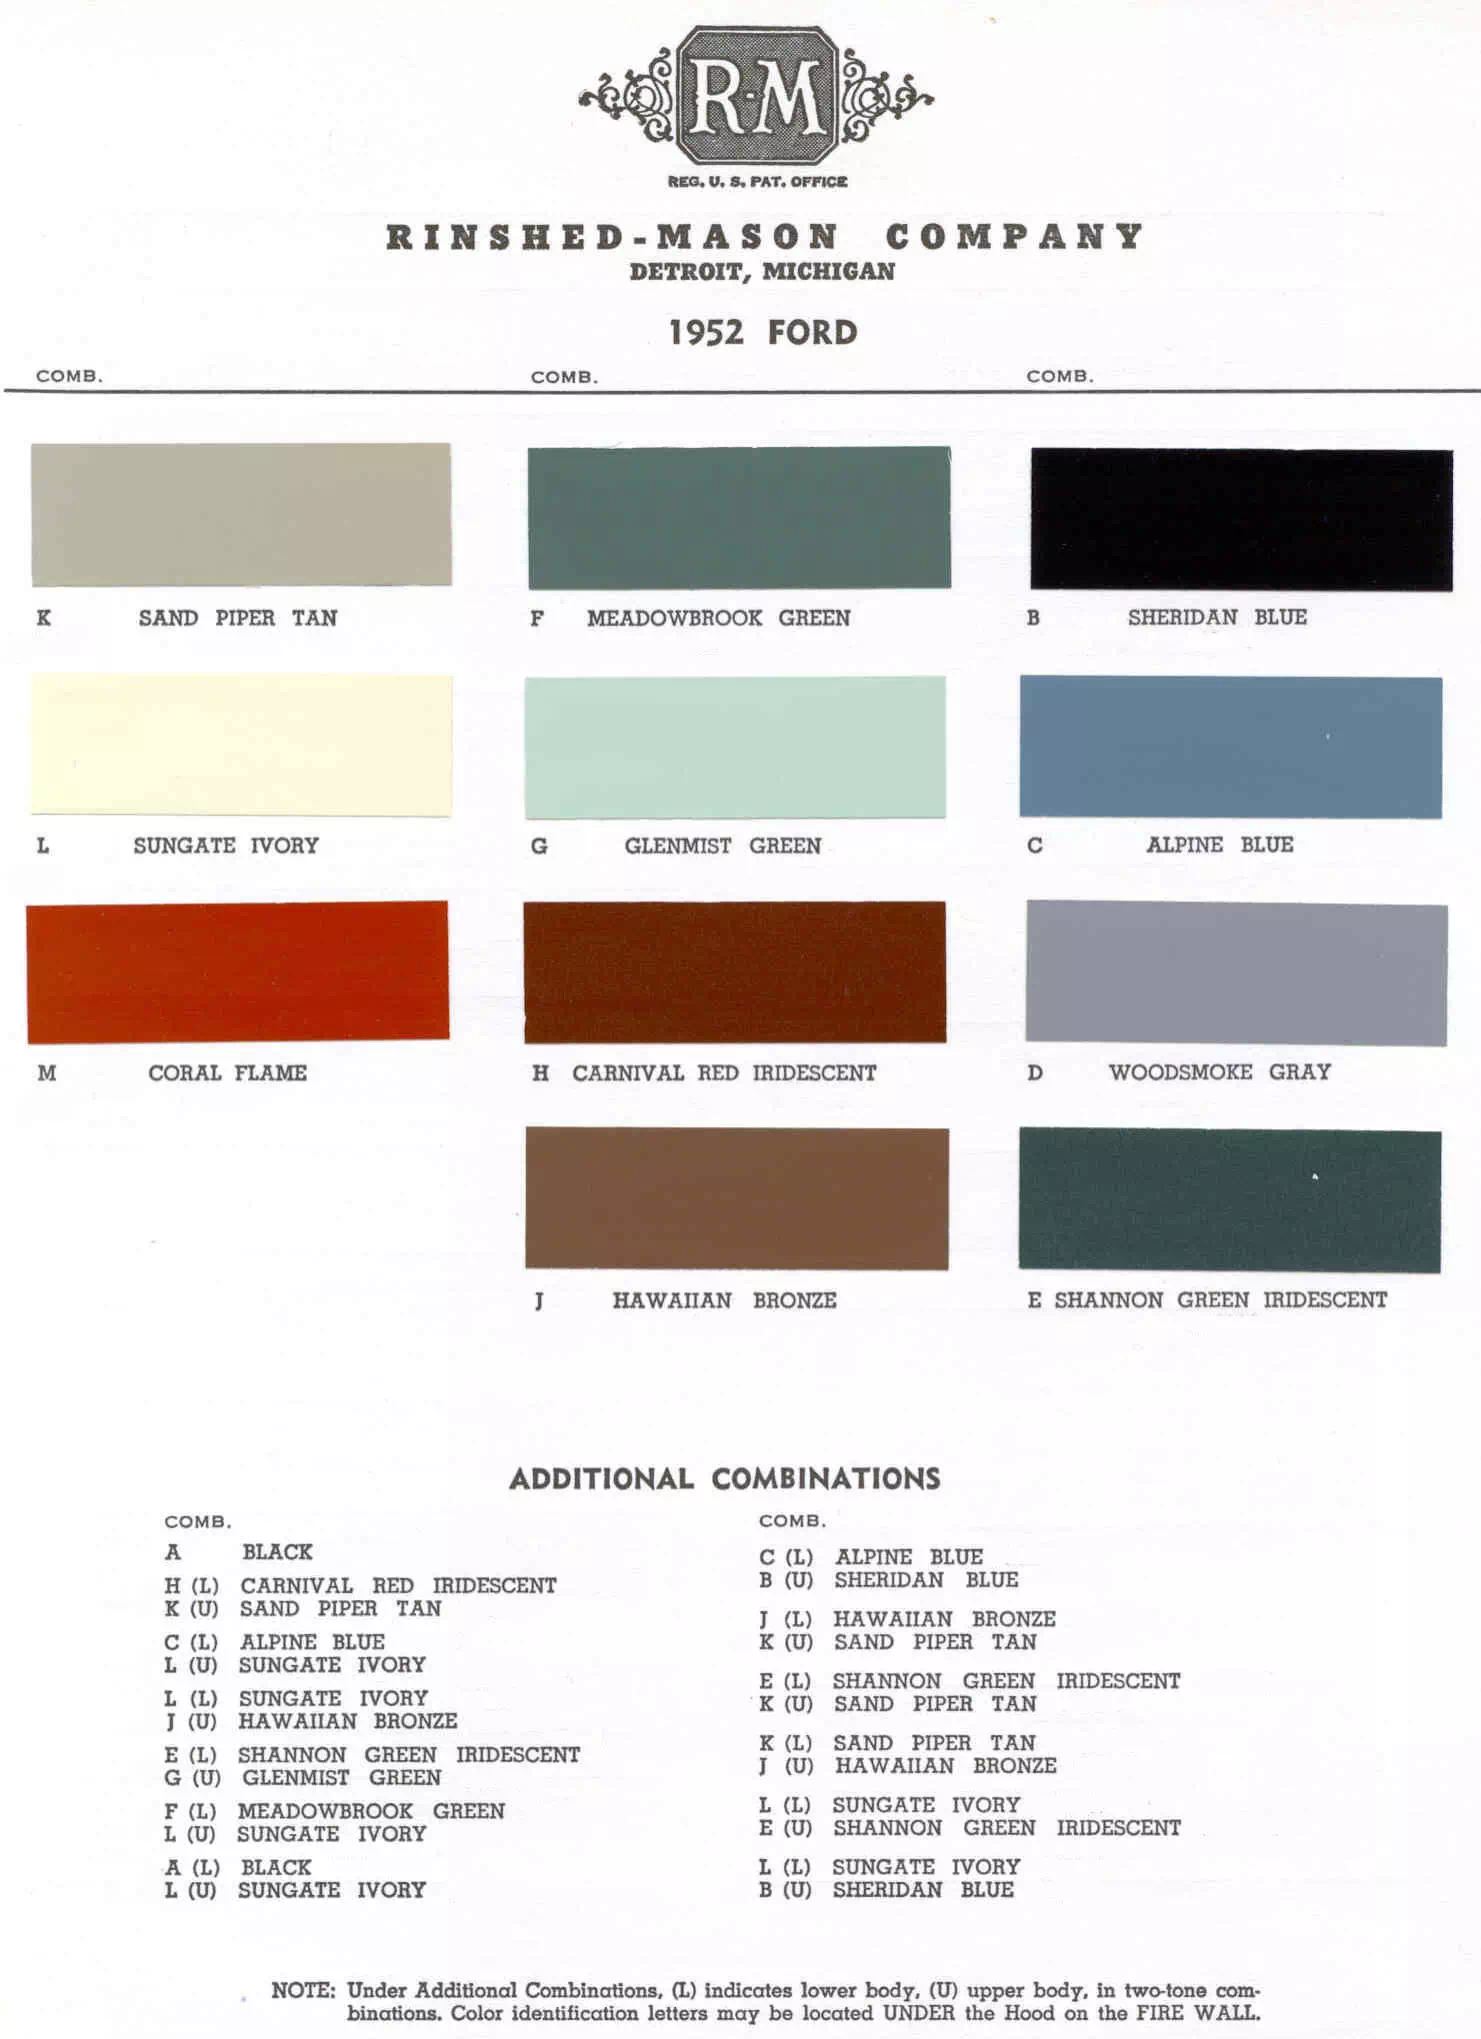 exterior colors, thier codes, and example swatches used on the exterior of the vehicles in 1952